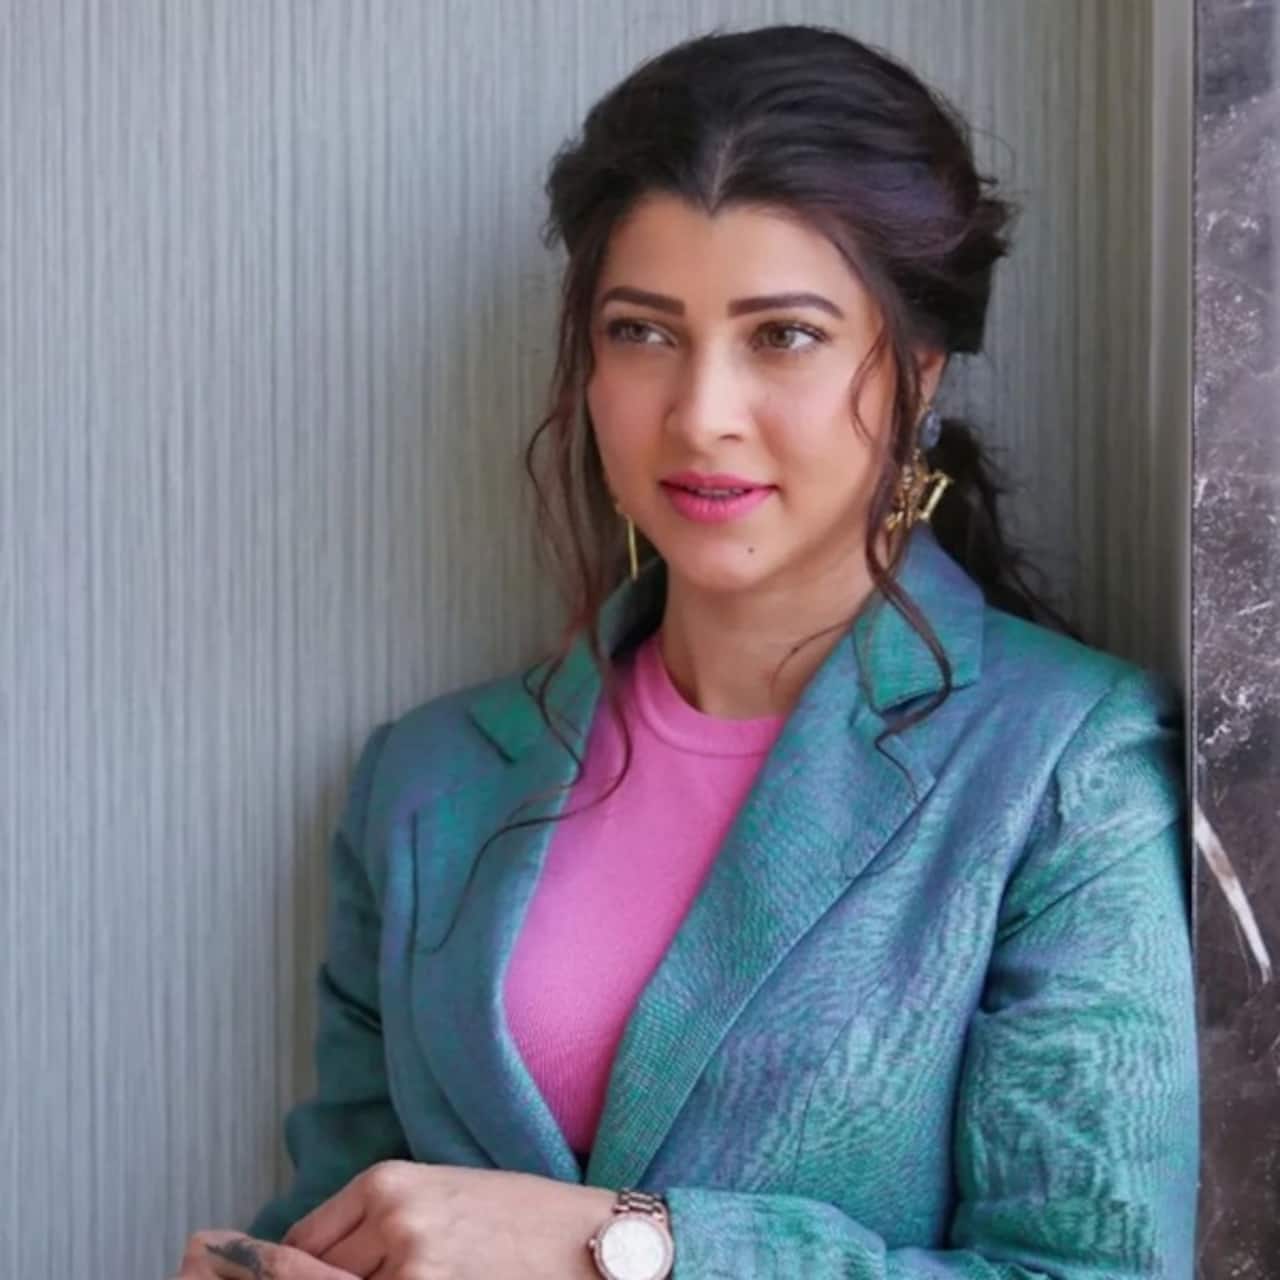 Tejaswini Pandit makes shocking revelation about a Pune-based corporator  who directly asked for sexual favours: I threw a glass of water on his face